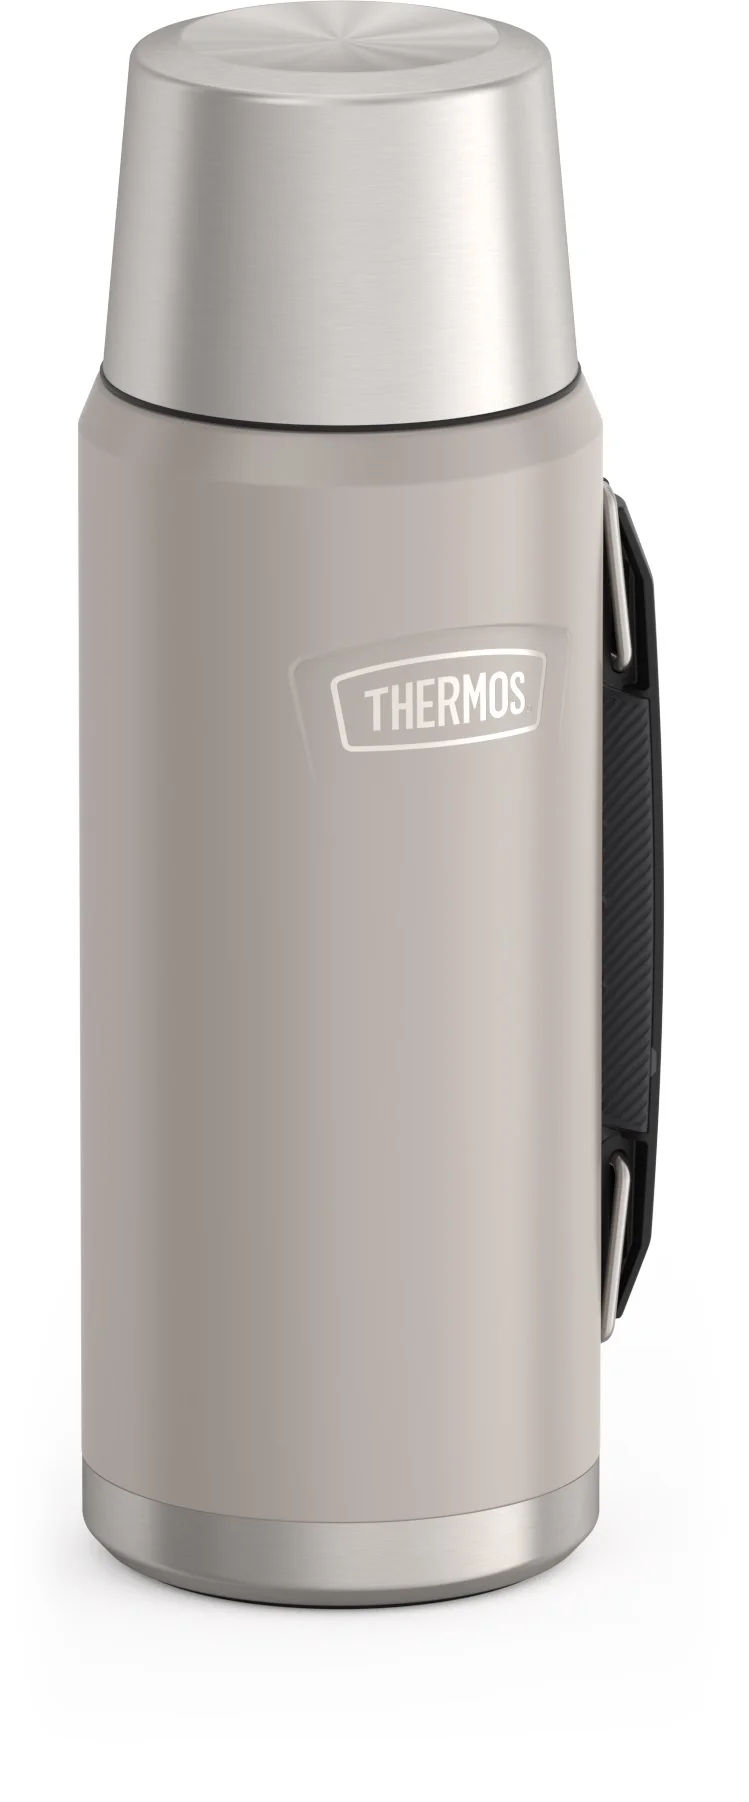 Thermos Stainless ICON Isoleerfles - Sandstone Mat - 1,2l